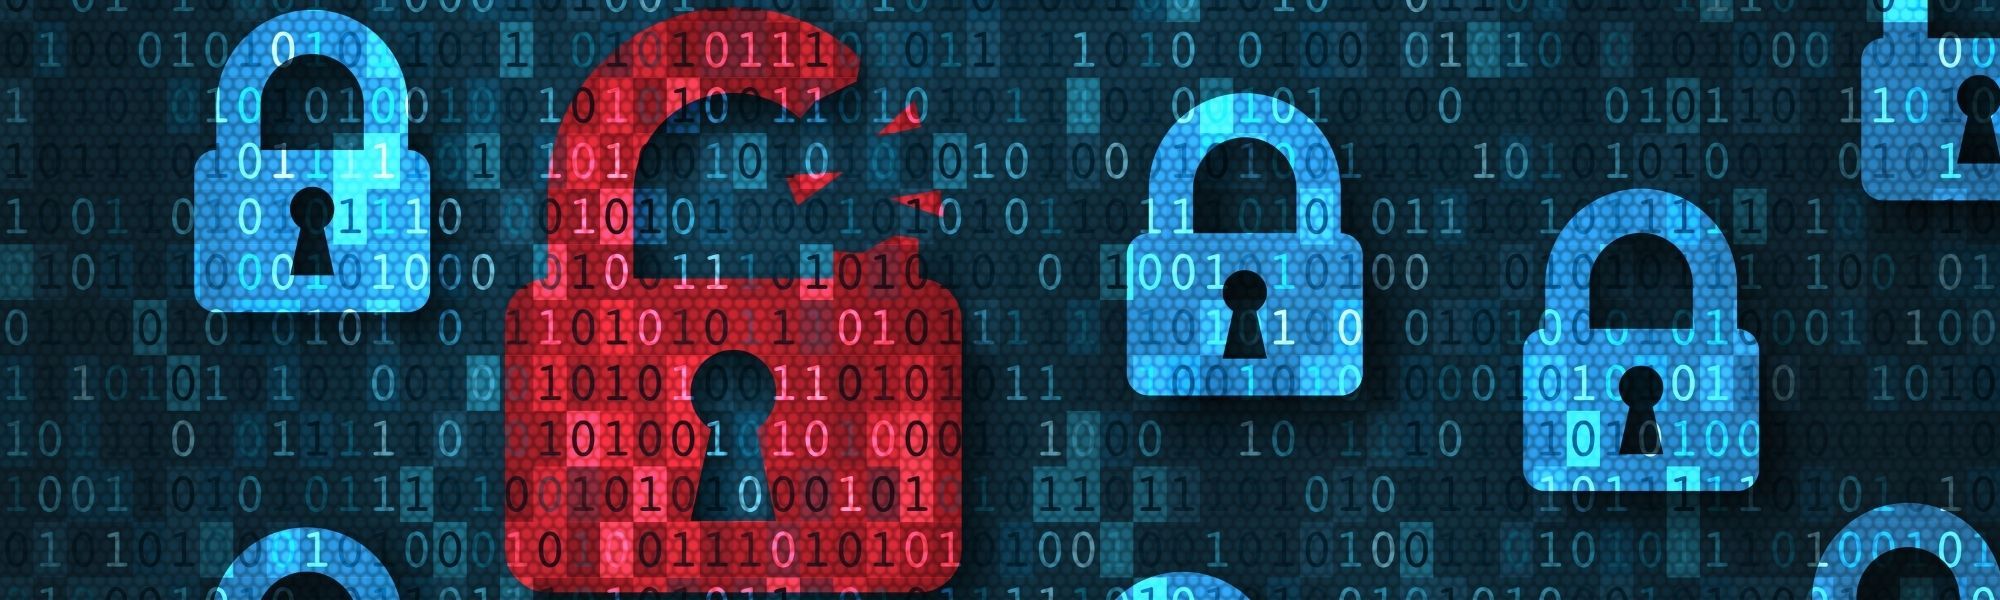 Cyber Security - A Business Critical Issue